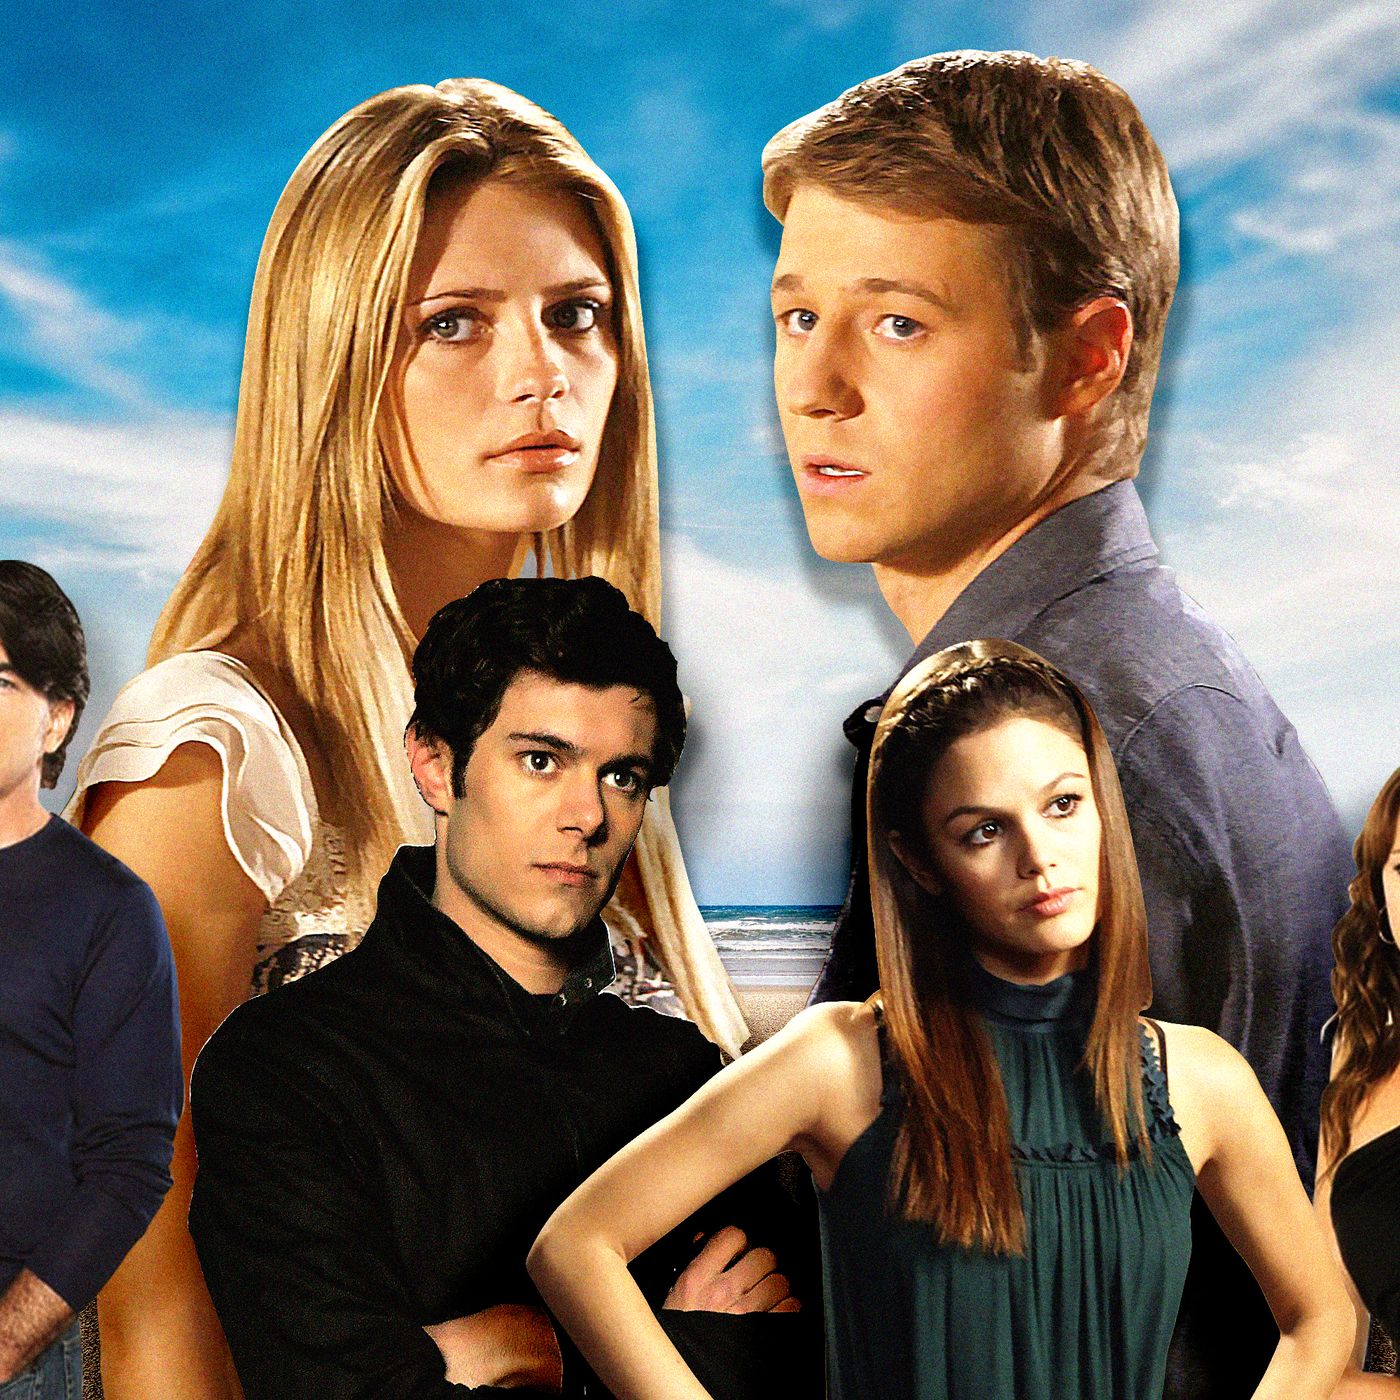 The Best Episodes of 'The O.C.' Ranked From Start to Finish